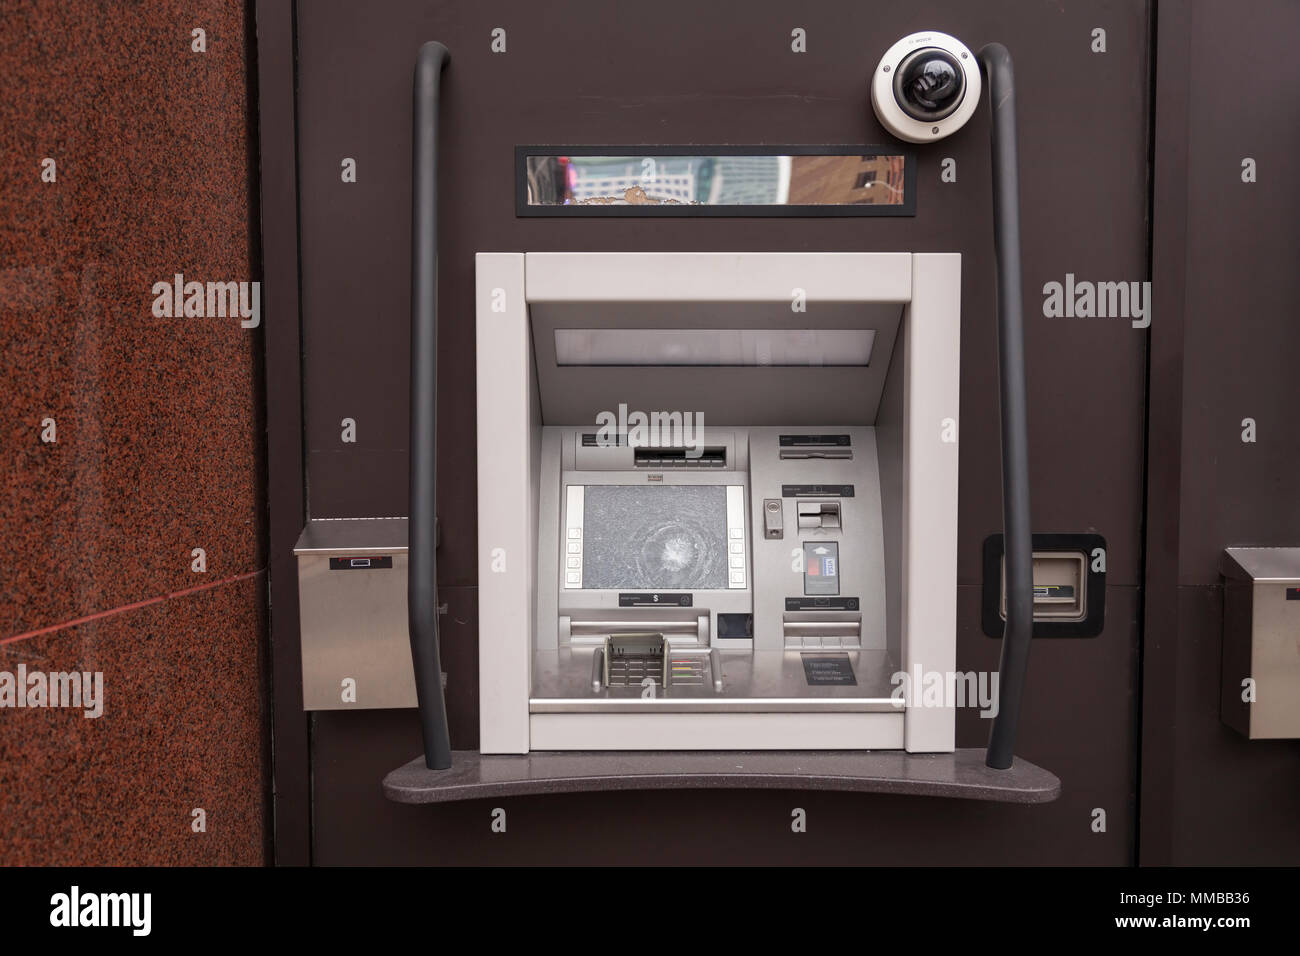 An ATM Automated Teller Machine with a smashed screen during the G20 summit in Downtown Toronto, Ontario, Canada. Stock Photo